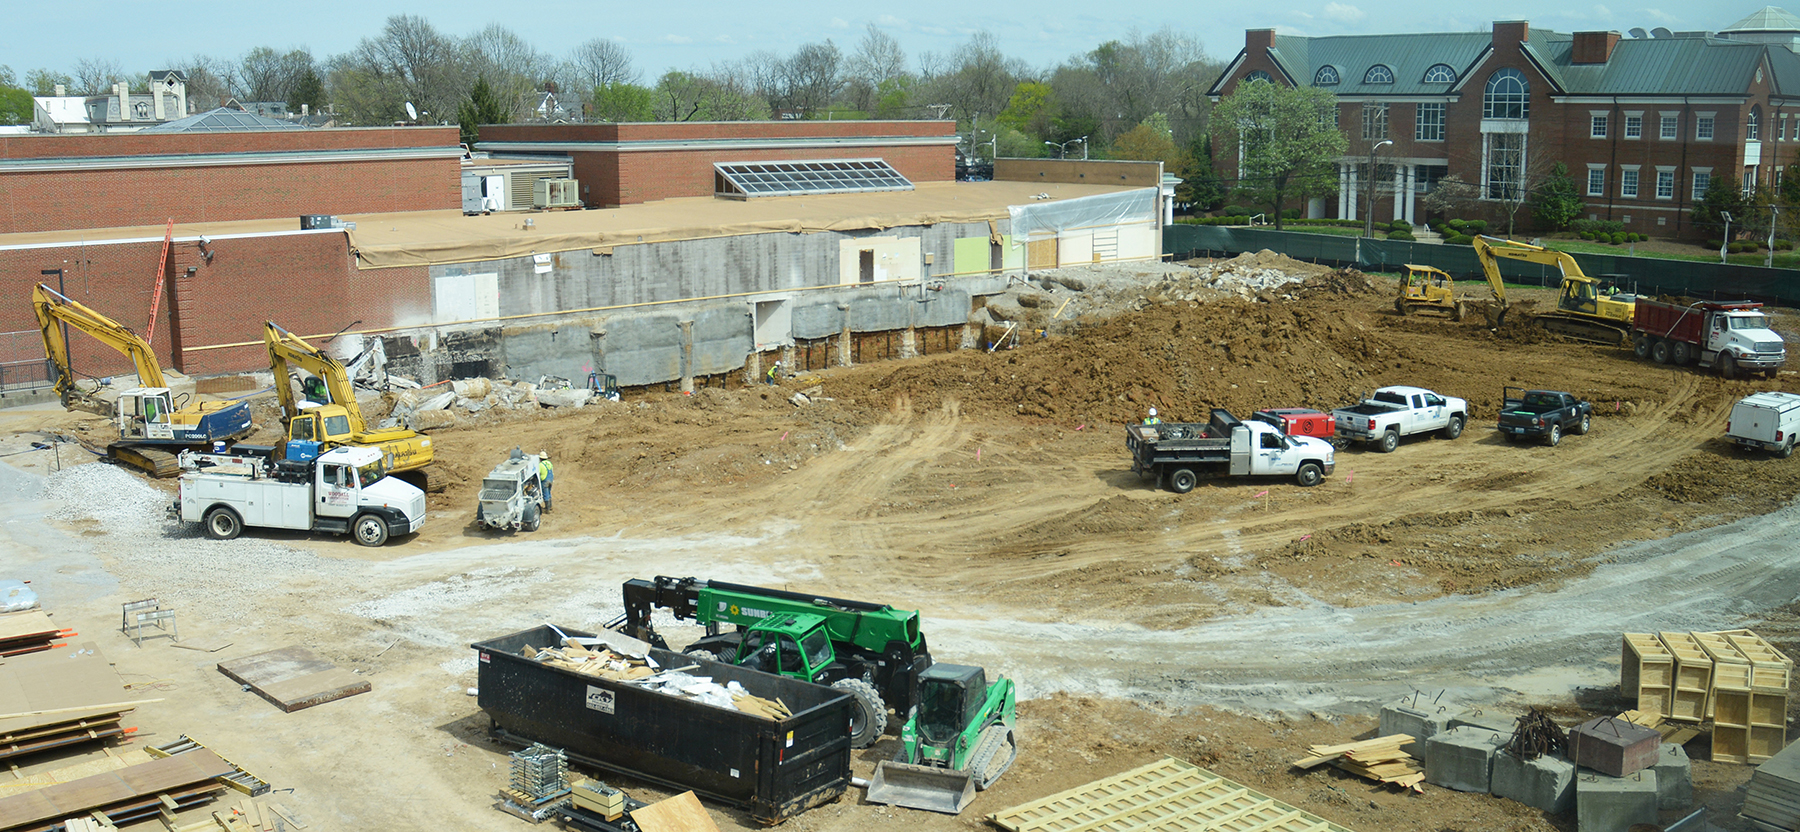 Demolition complete, construction underway on new Campus Center at Transy